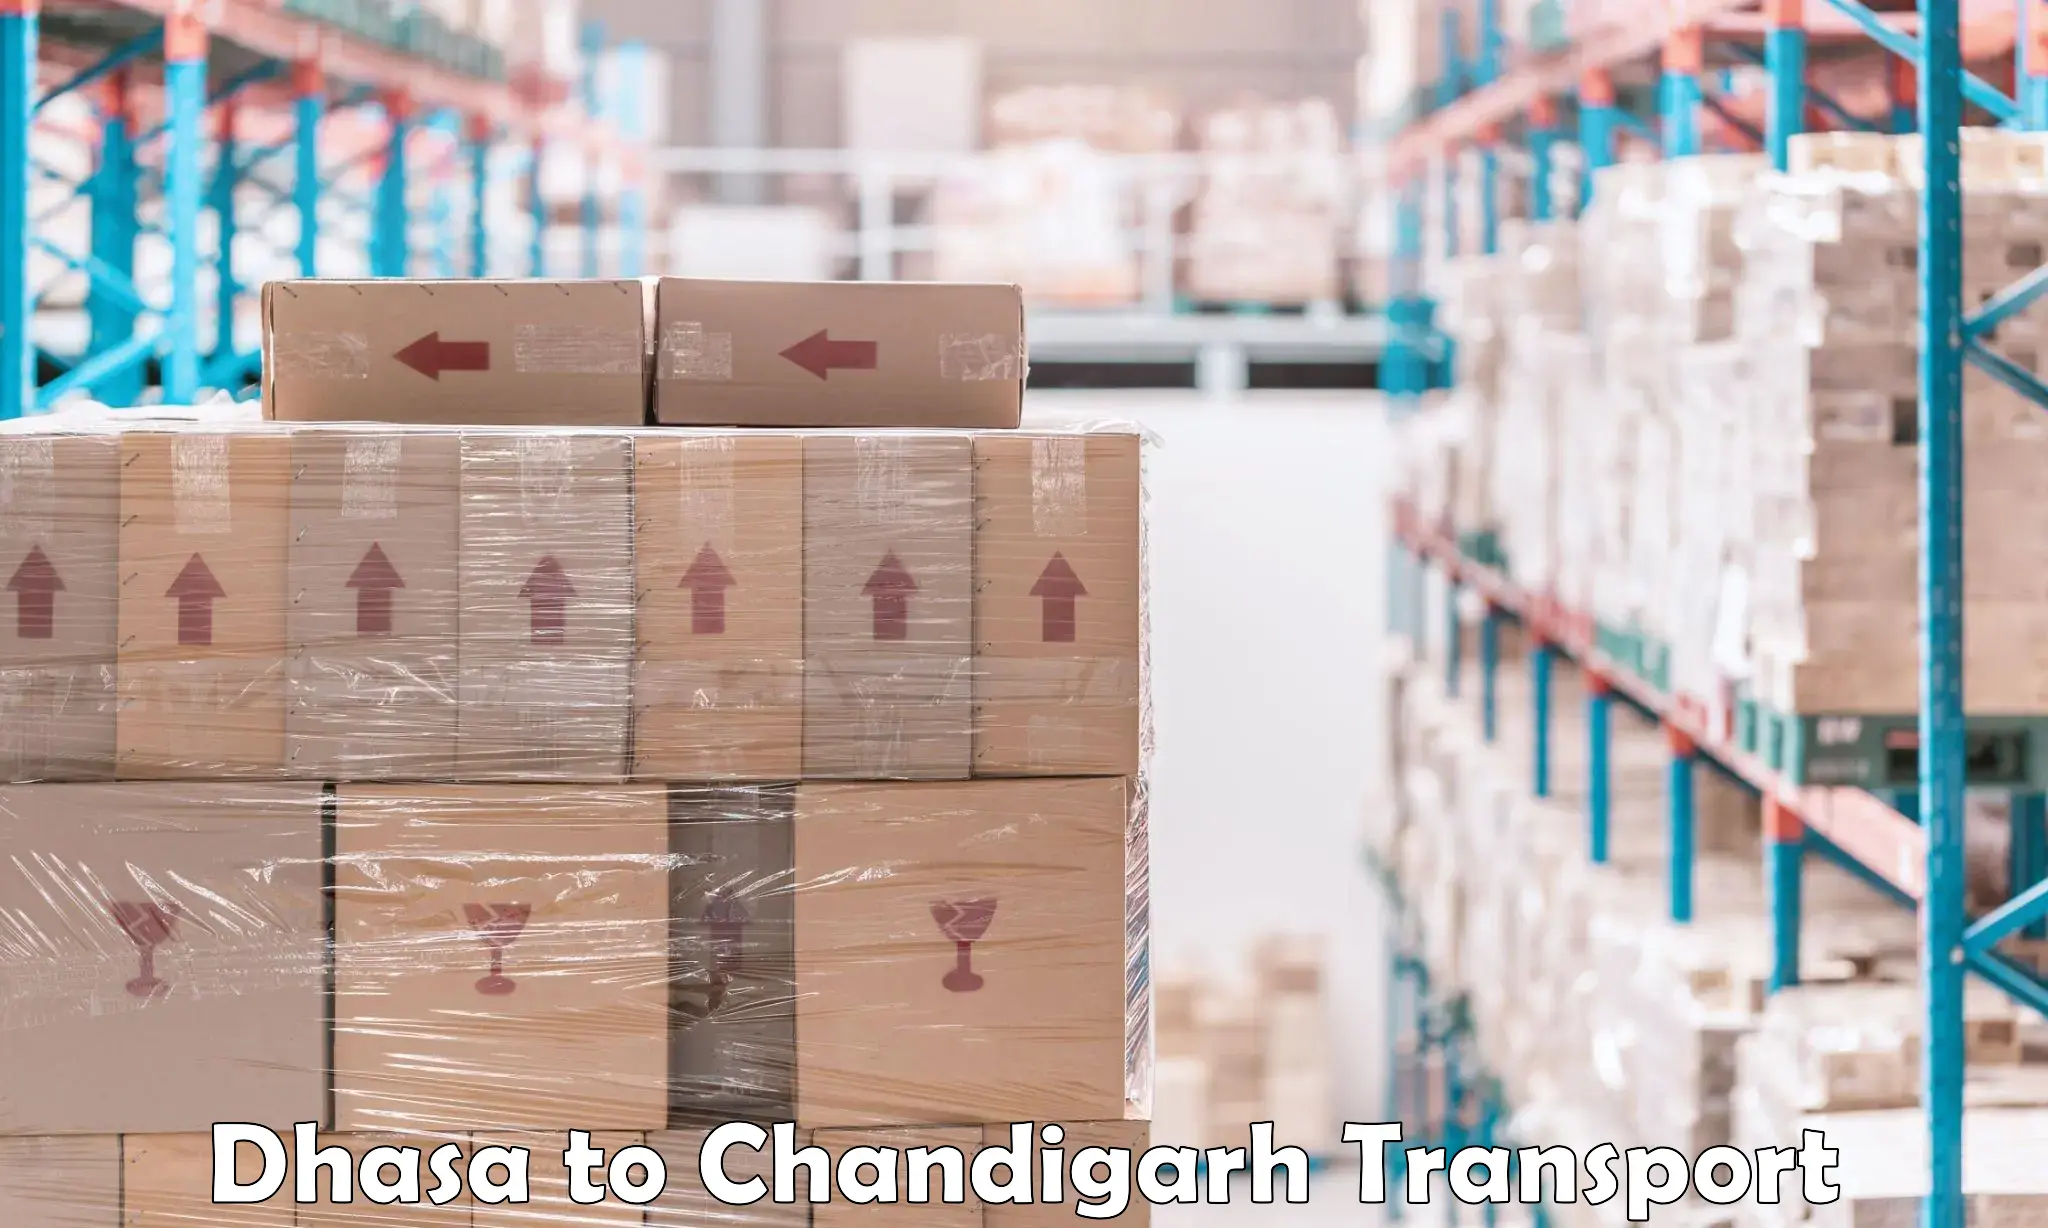 Nearby transport service Dhasa to Chandigarh